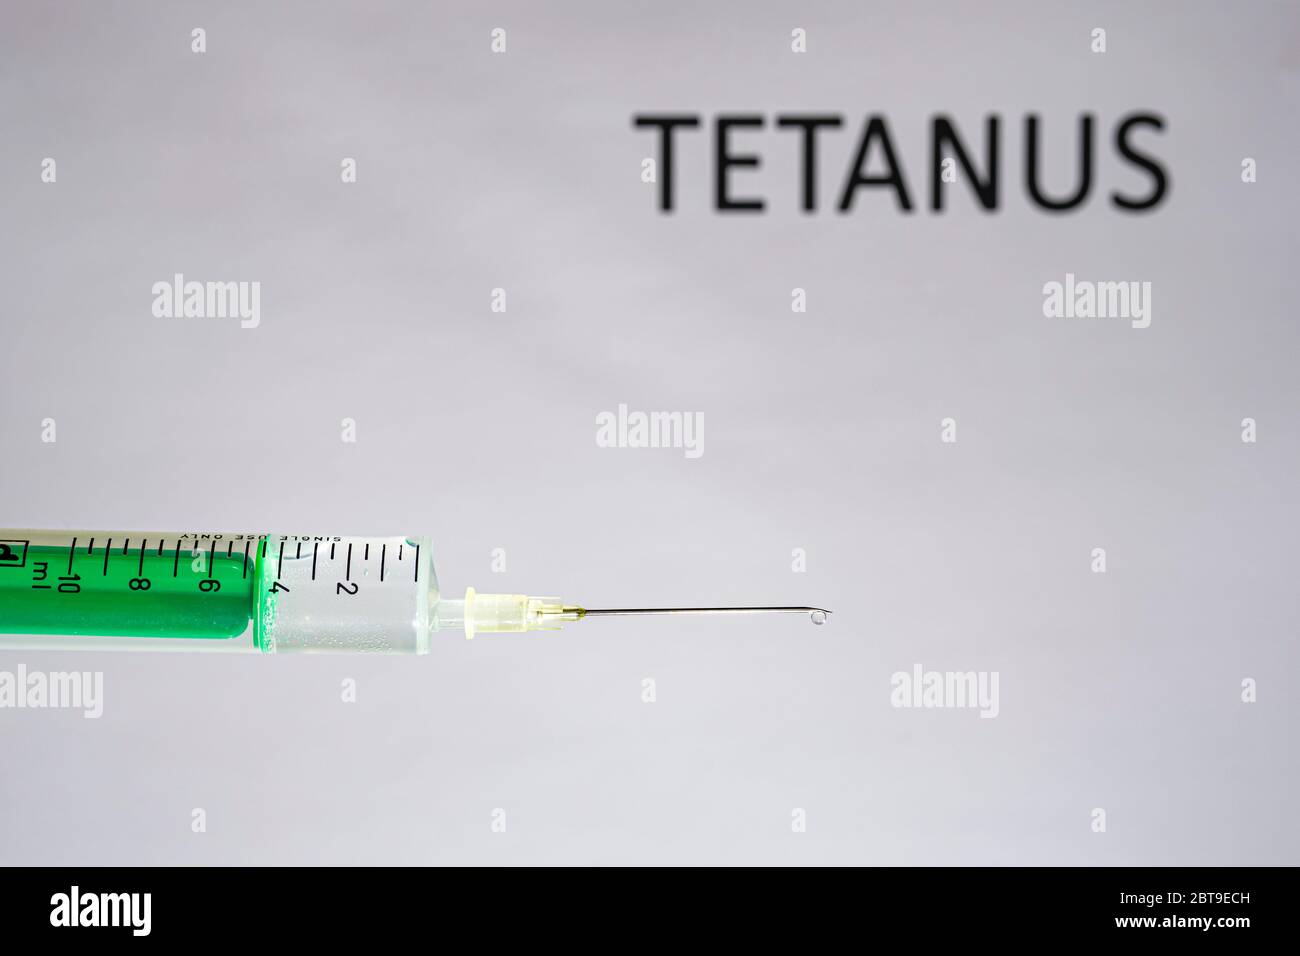 This photo illustration shows a disposable syringe with hypodermic needle, TETANUS written on a white board behind Stock Photo